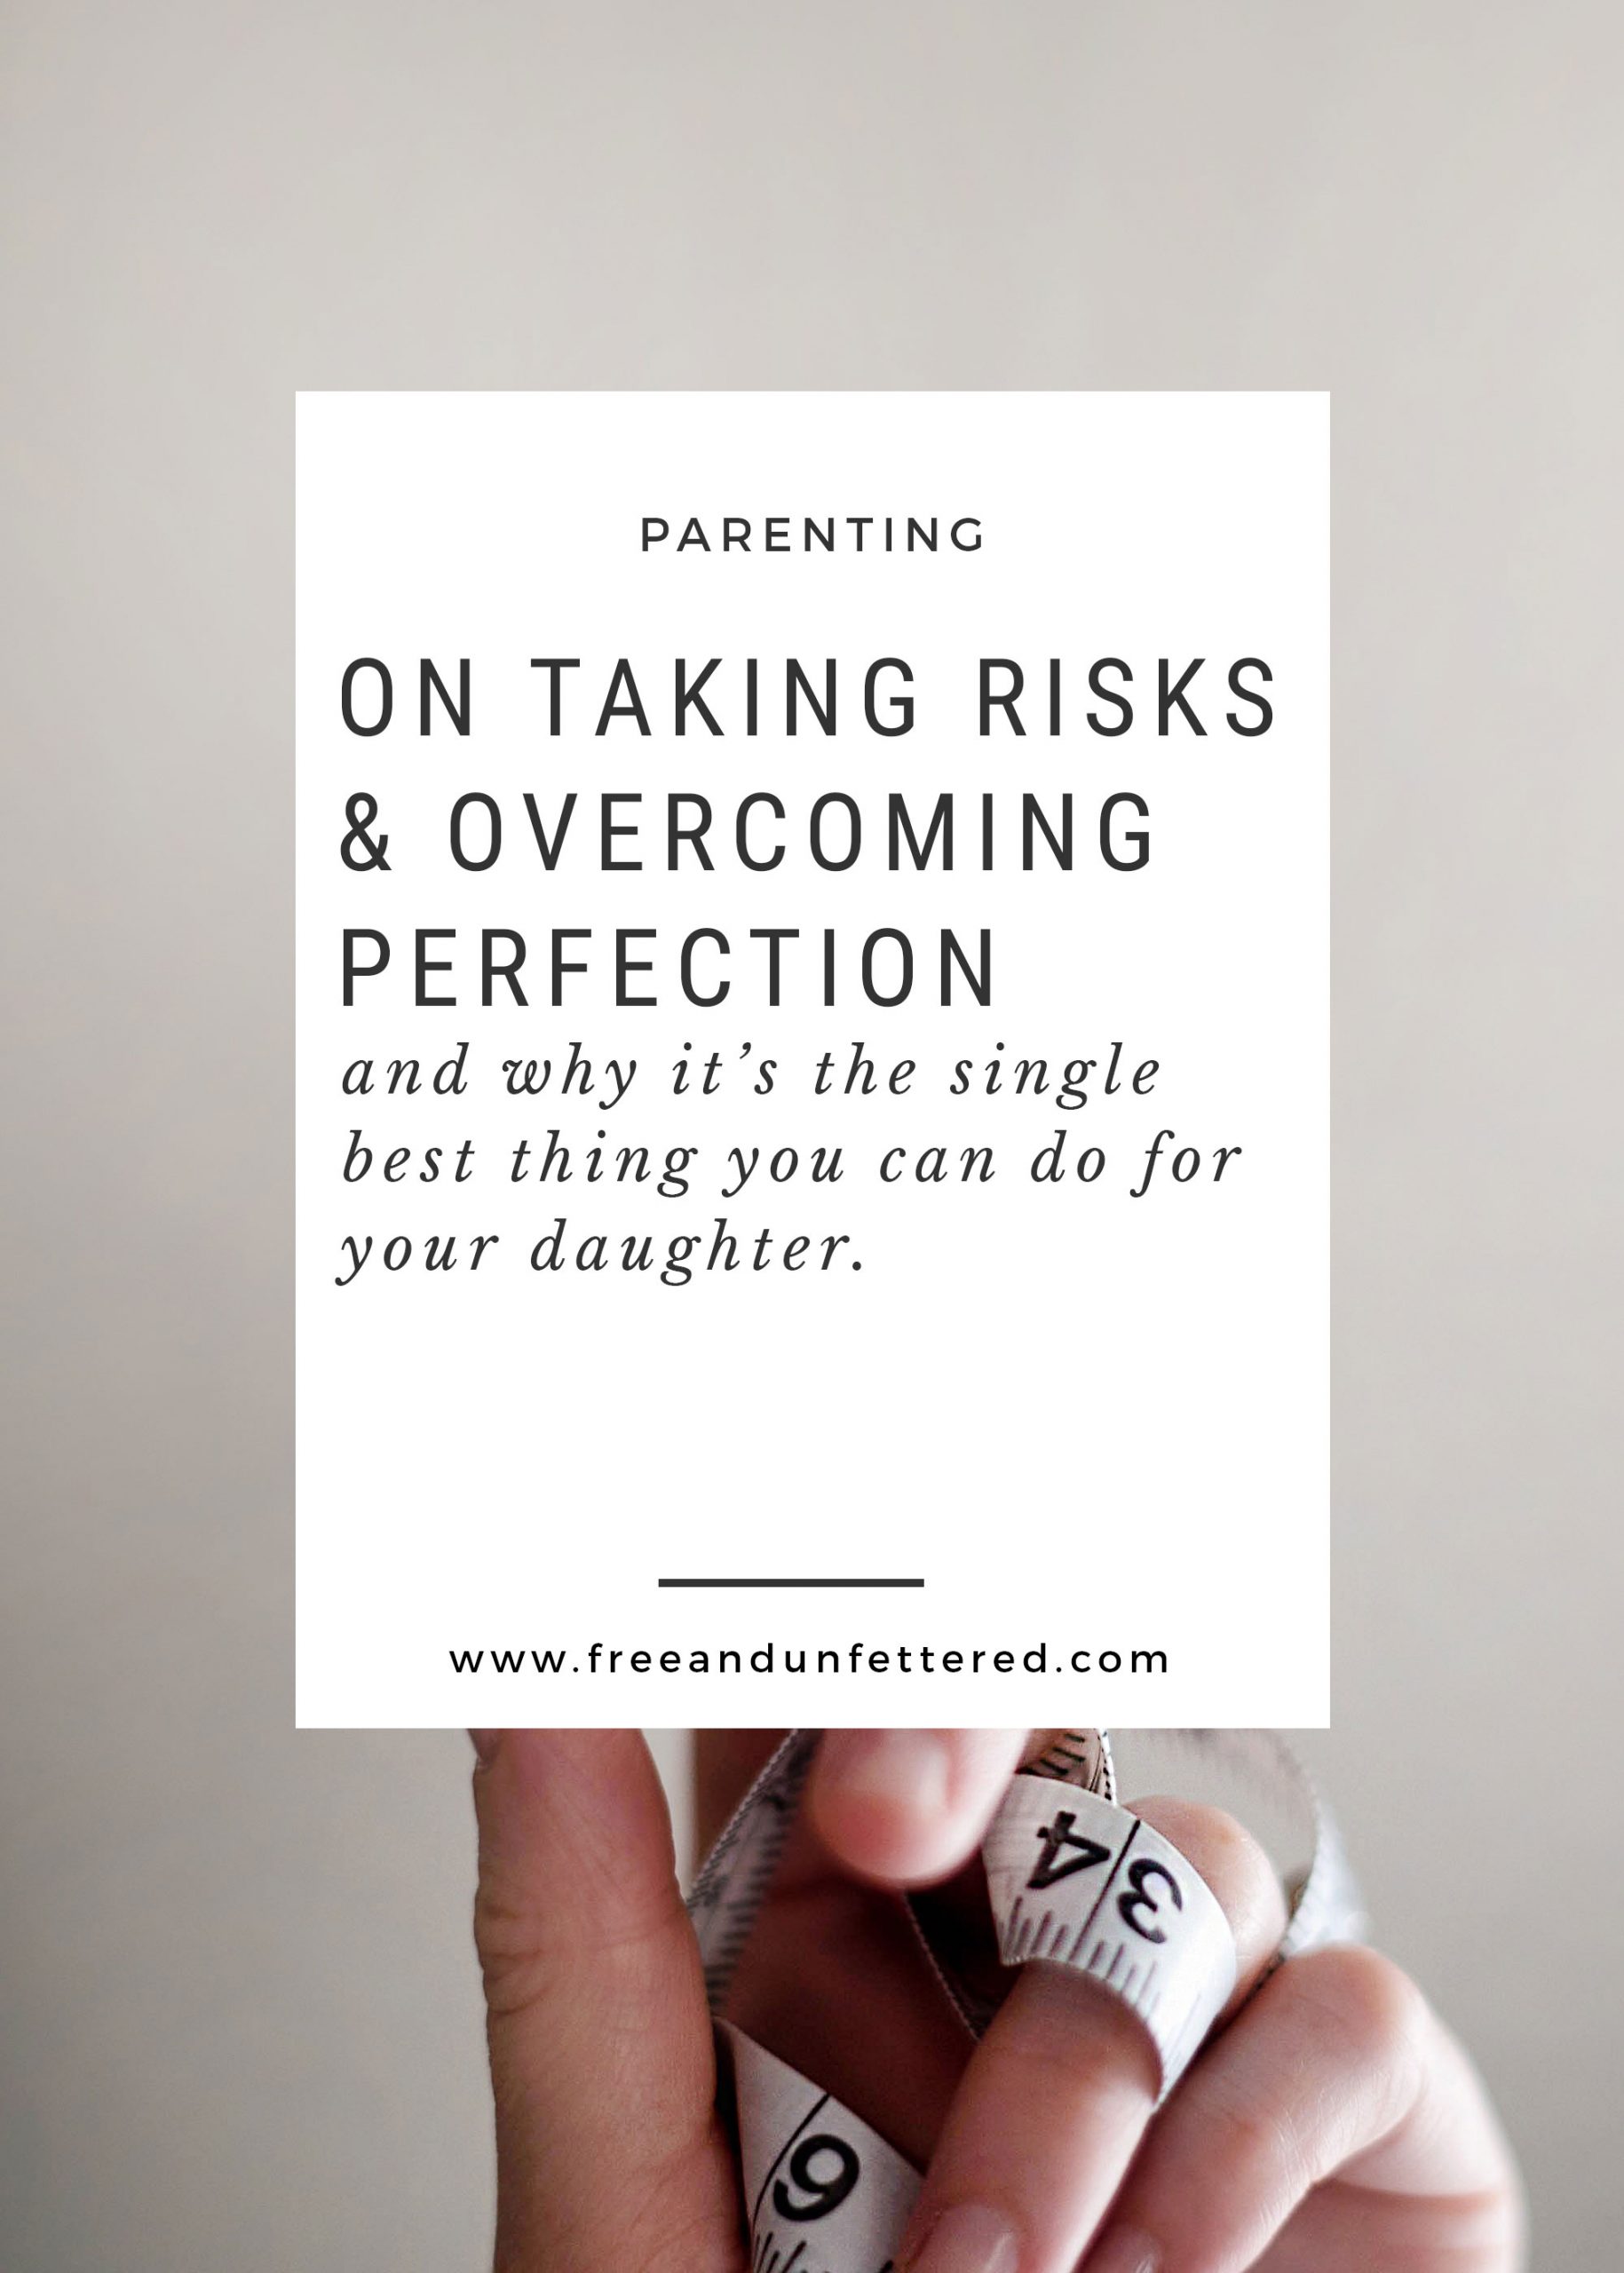 On Taking Risks & Overcoming Perfection